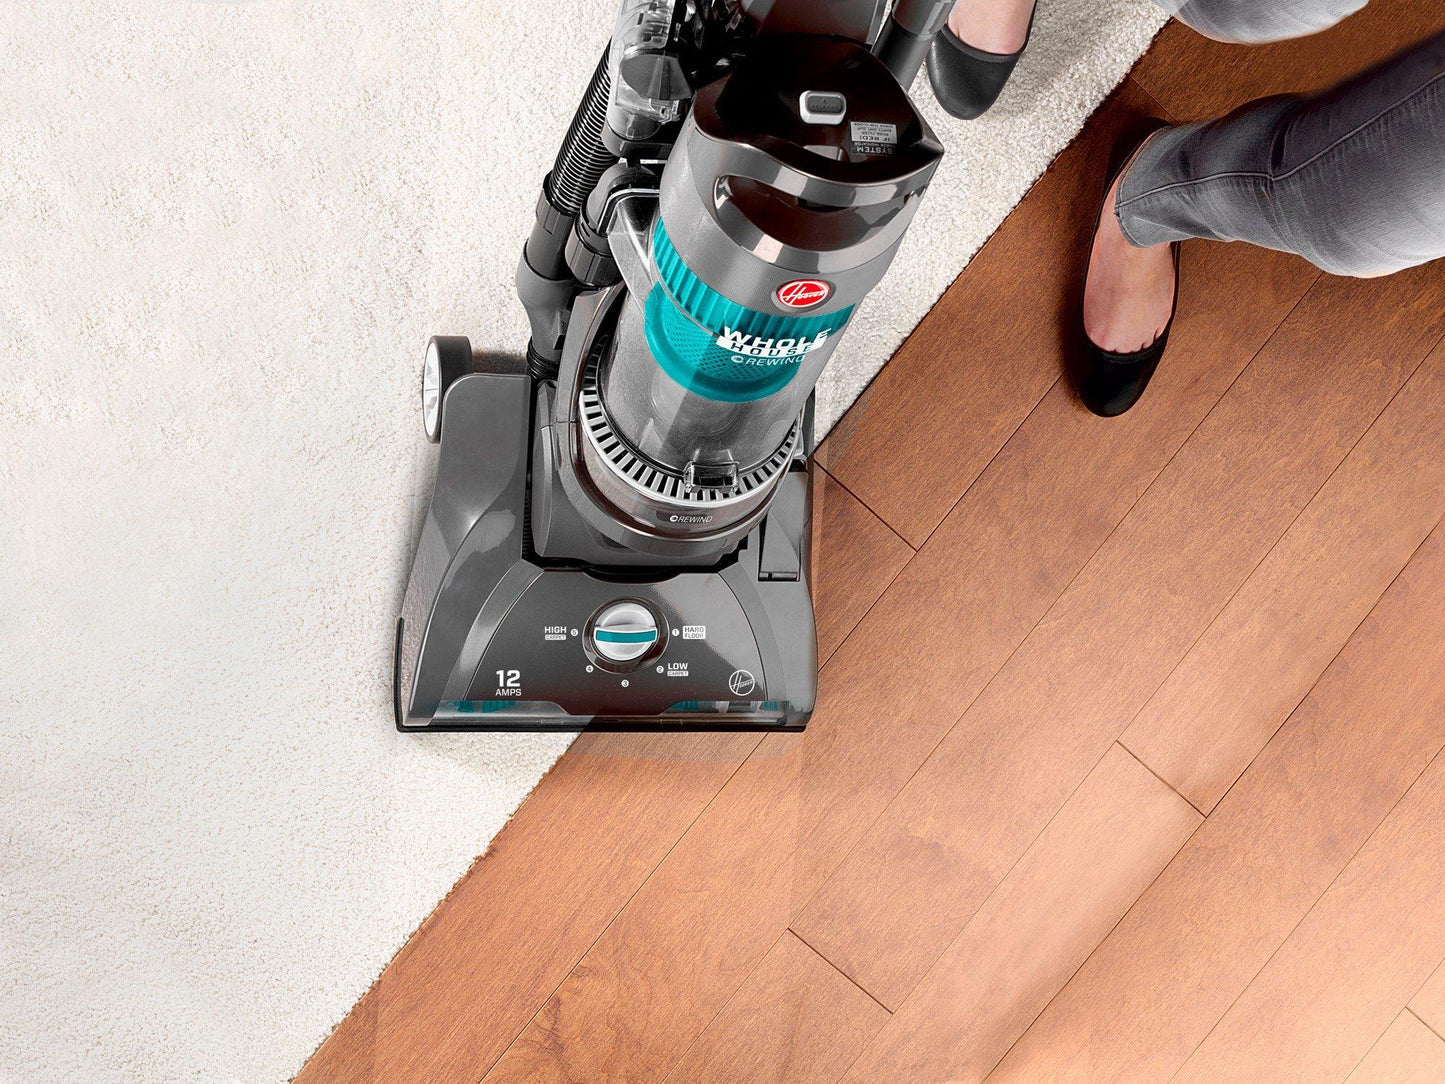 WindTunnel 2 Whole House Rewind Upright Bagless Vacuum